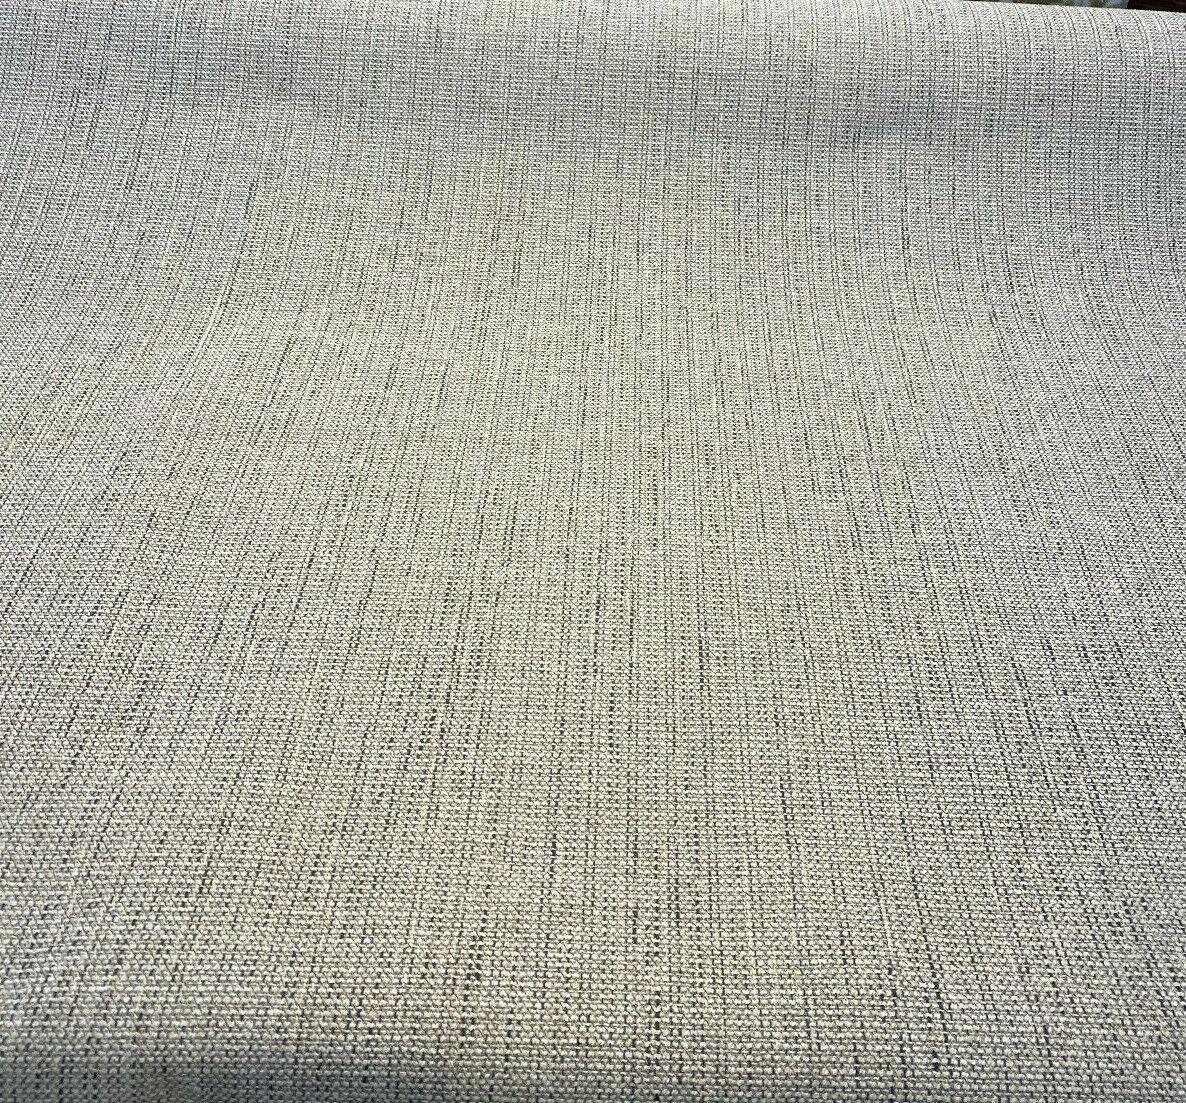 Highland Birch Beige Tweed Chenille Upholstery Fabric By The Yard